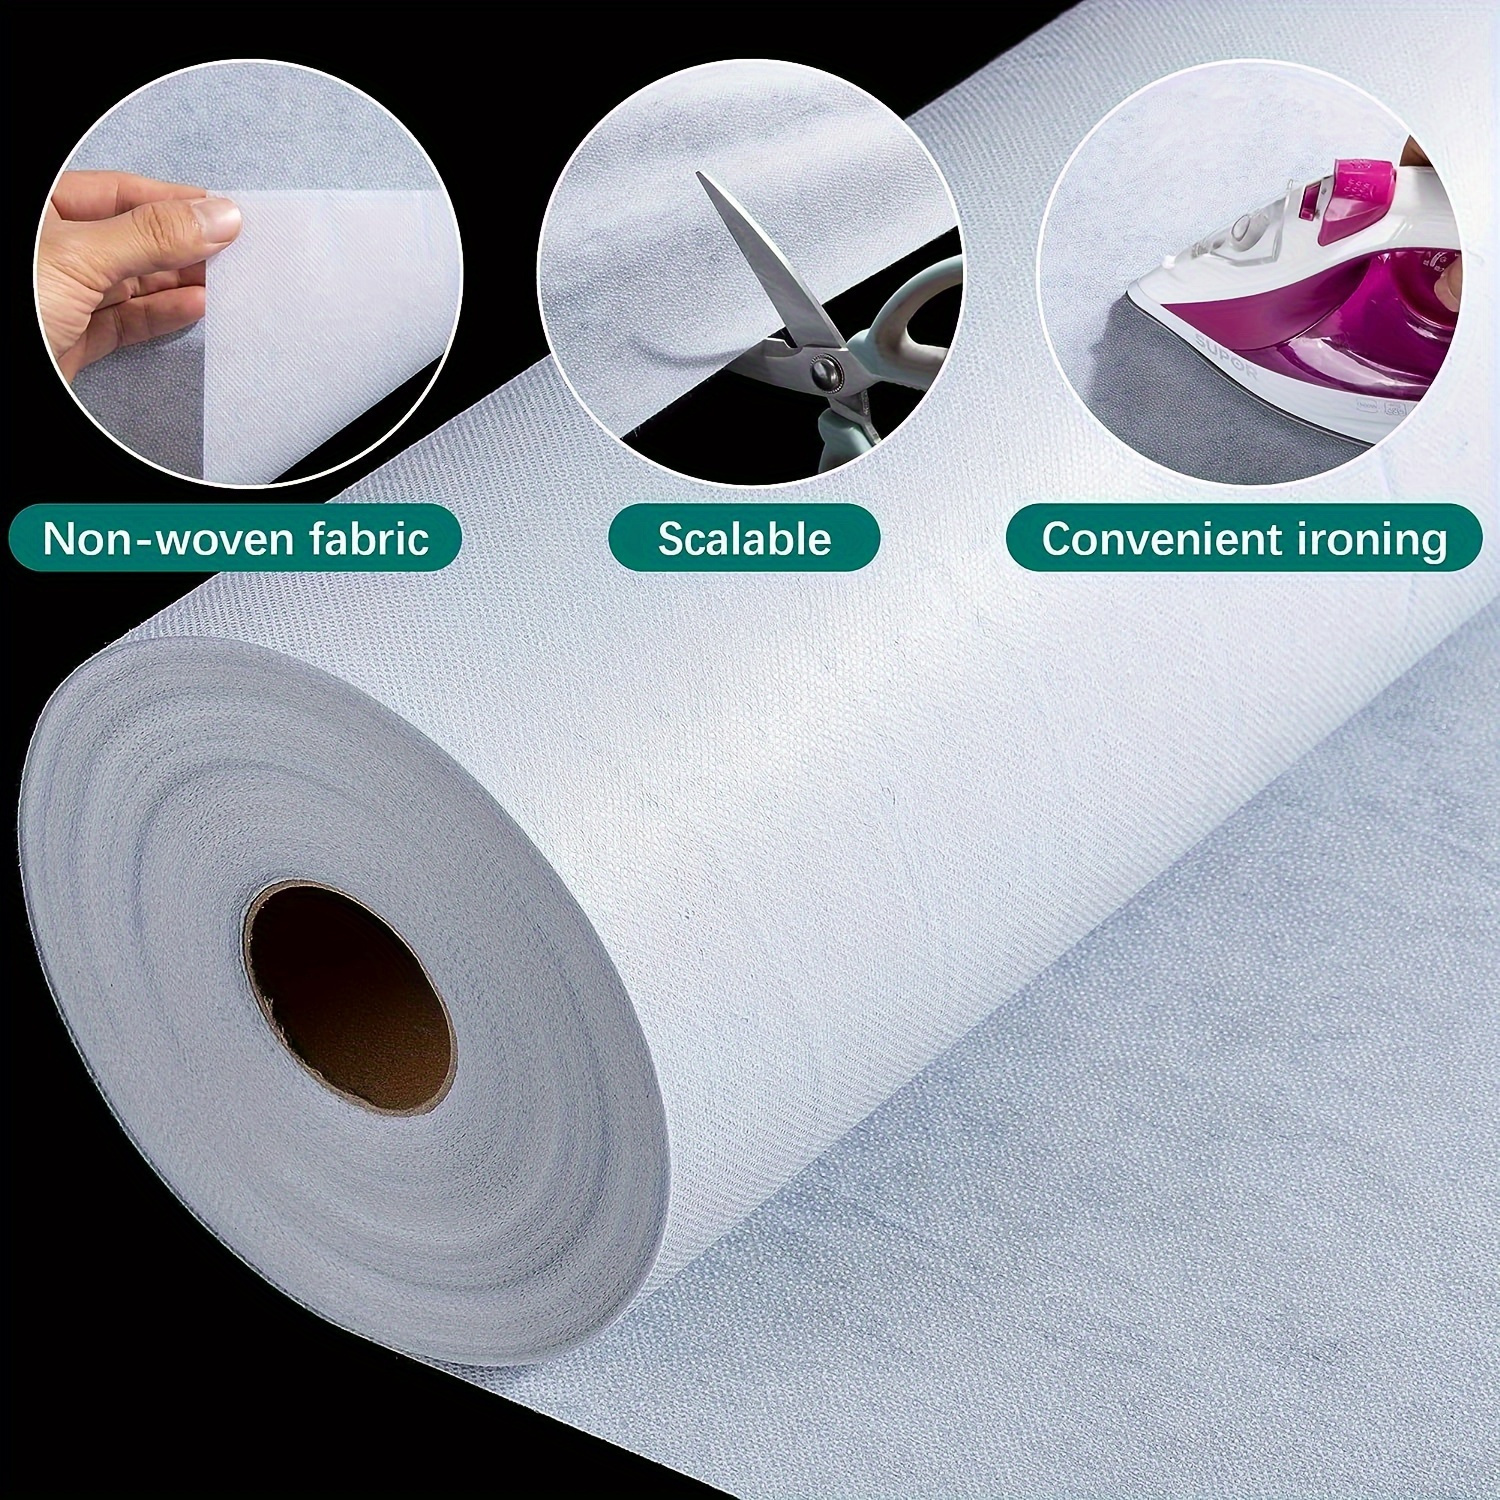 1pc 19.69inch*39.37inch Iron-On Fusible Fleece Interfacing For Sewing  Crafting Quilting Non-Woven Iron On Fusible Batting One Sided Fusible Foam  Stabi